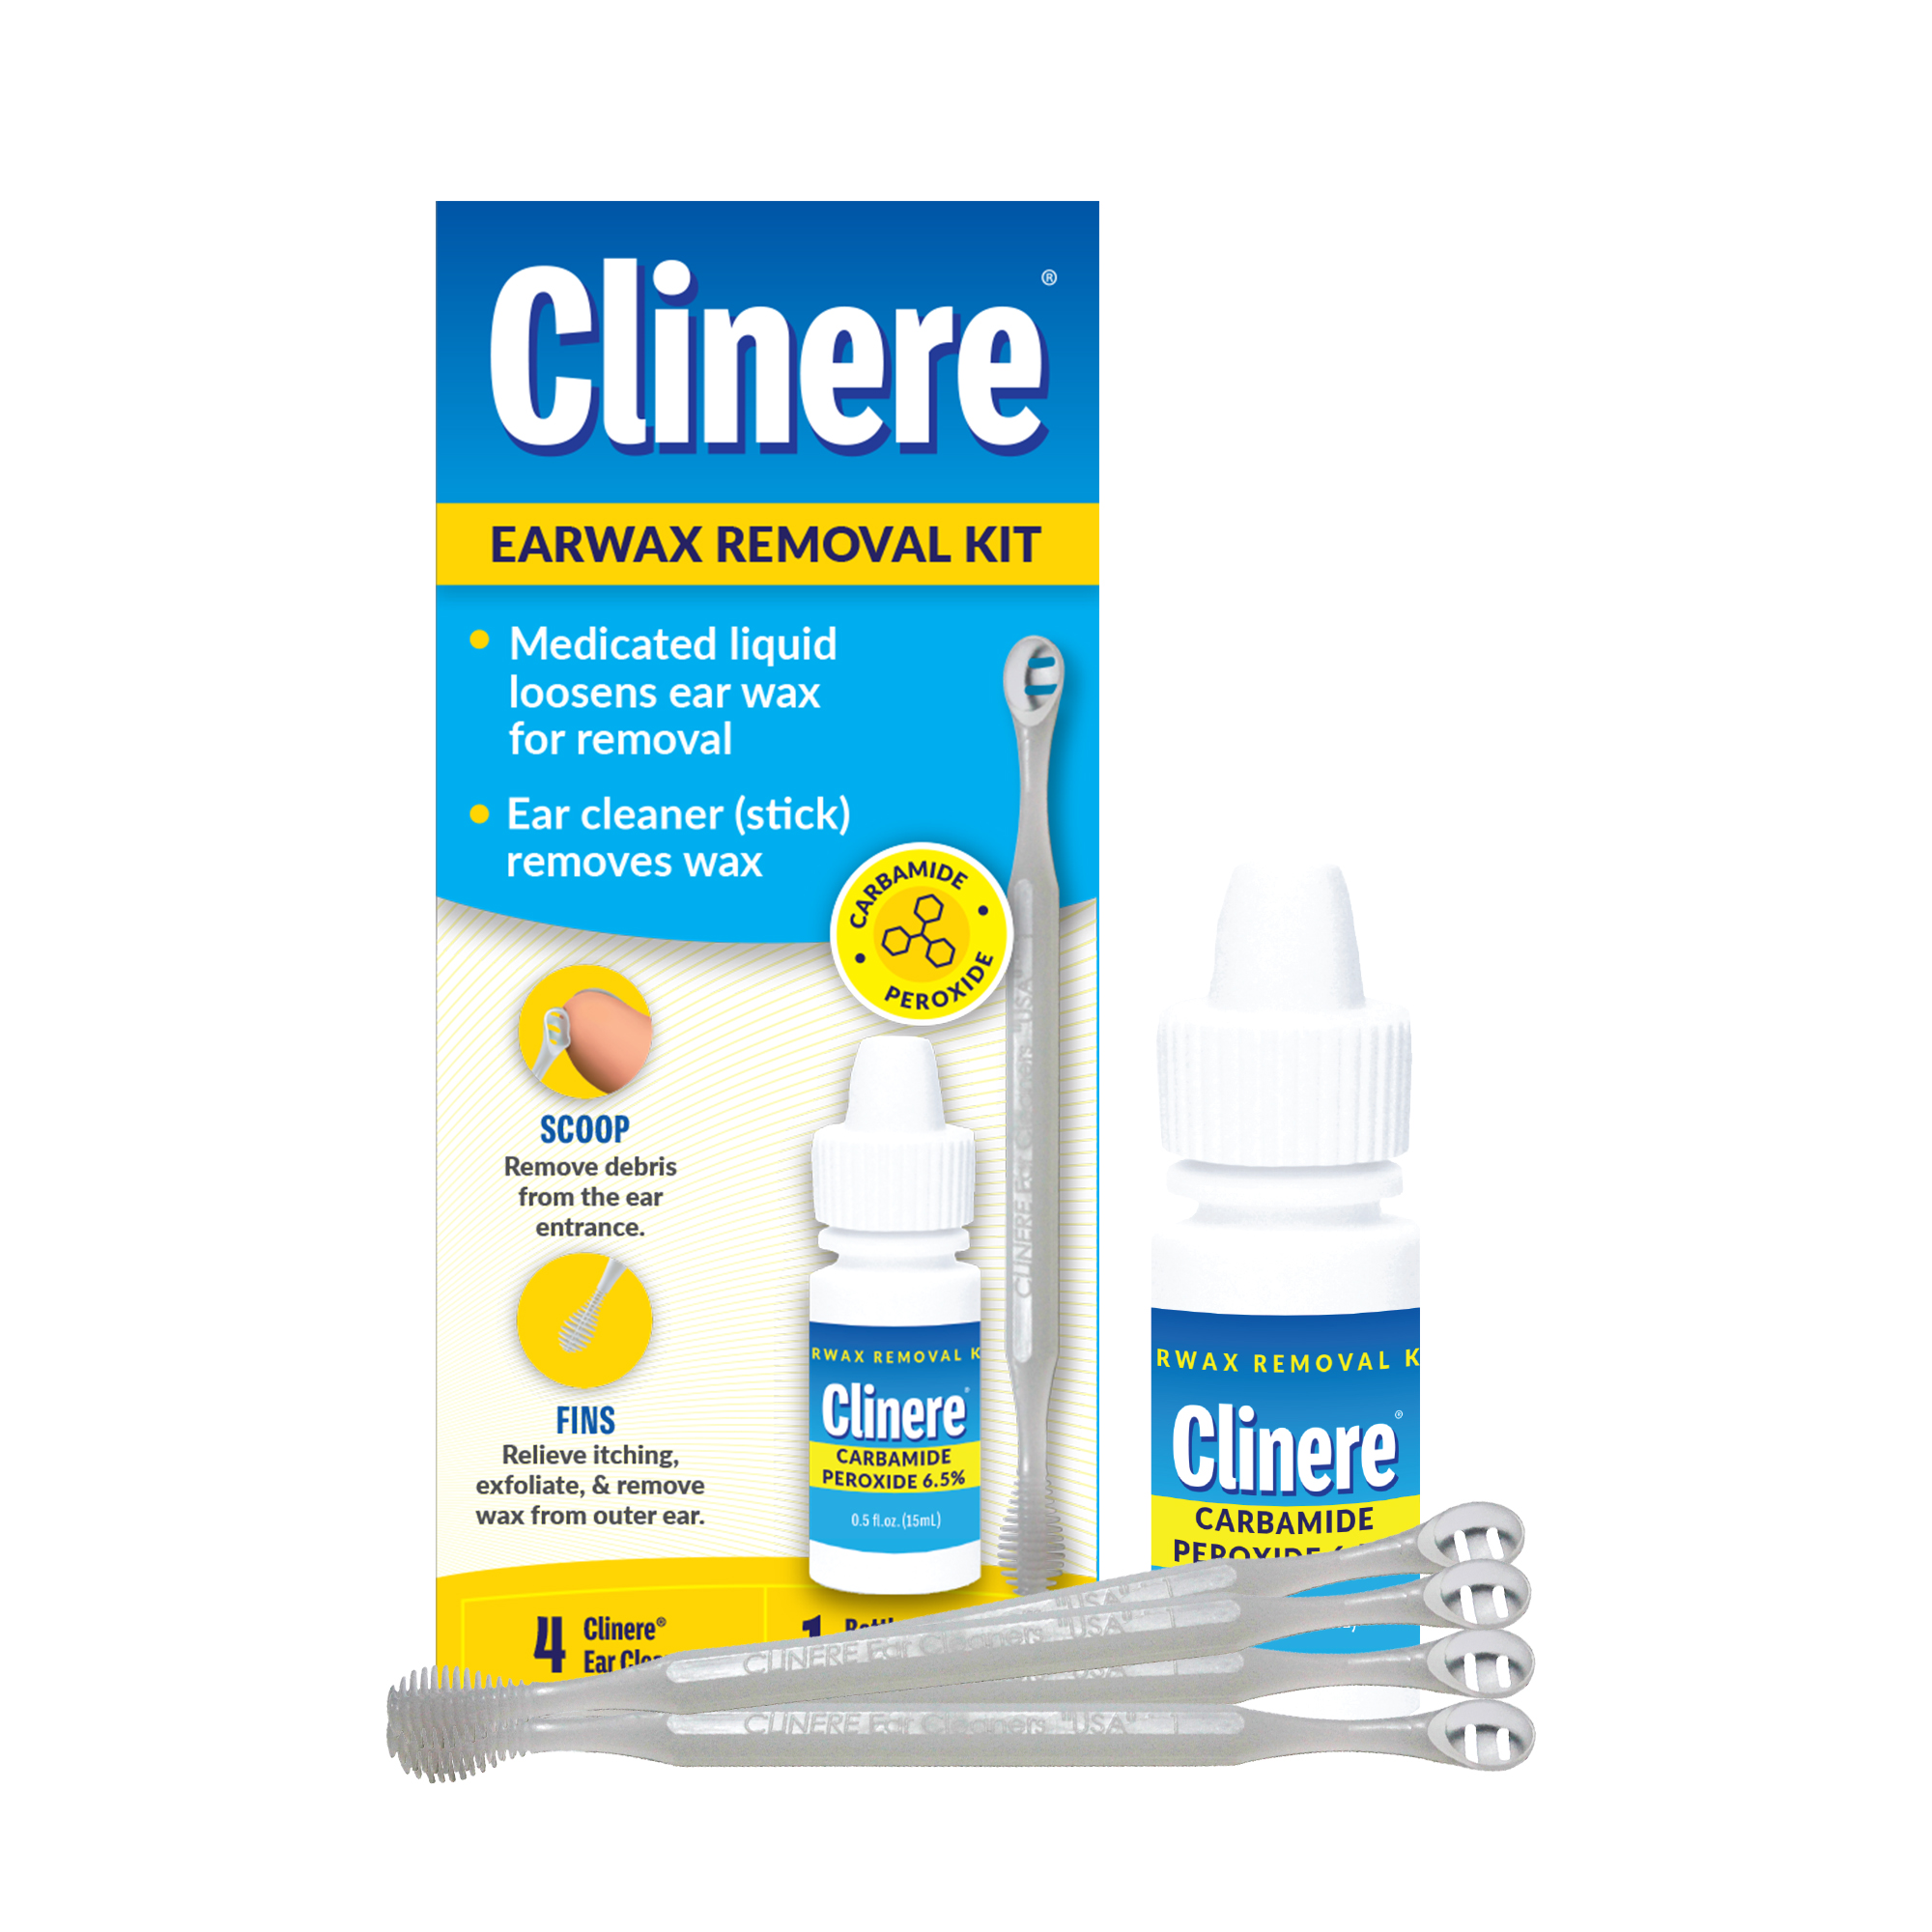 Clinere Carbamide Peroxide Ear Care Kit - image 1 of 8